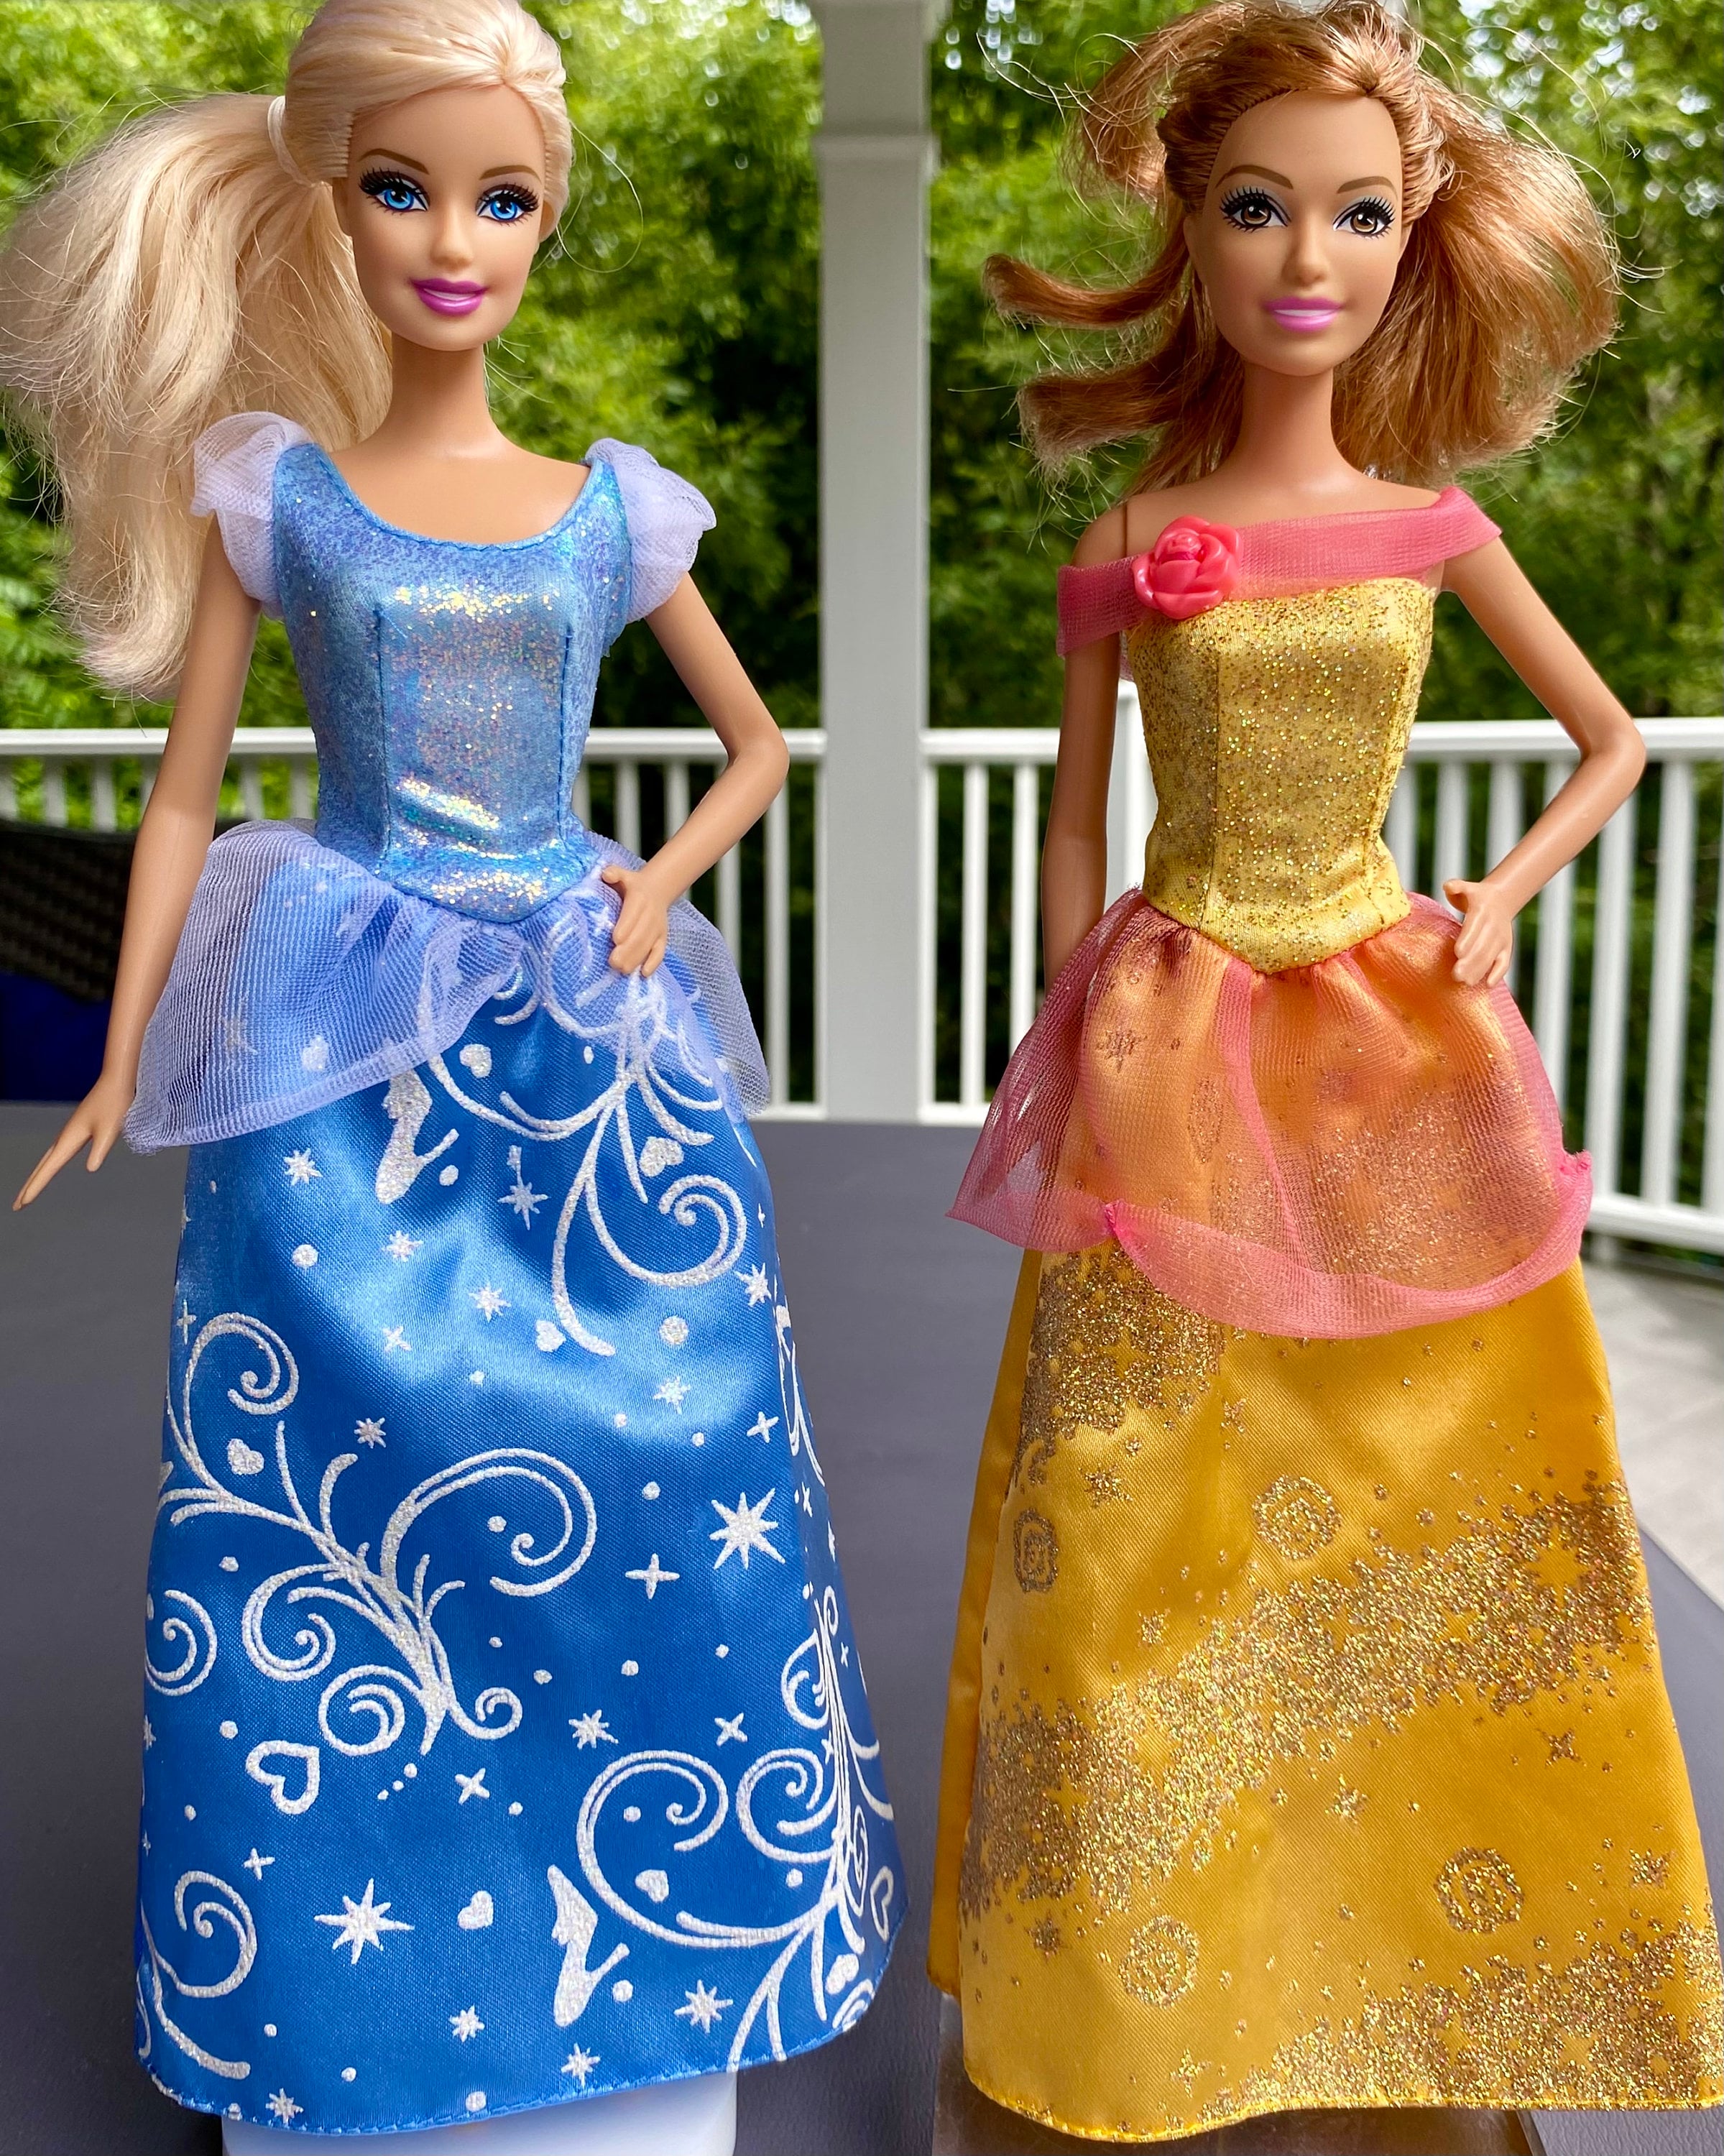 Barbie Halloween Costumes … | Princess dresses for adults, Barbie costume,  Princess outfits